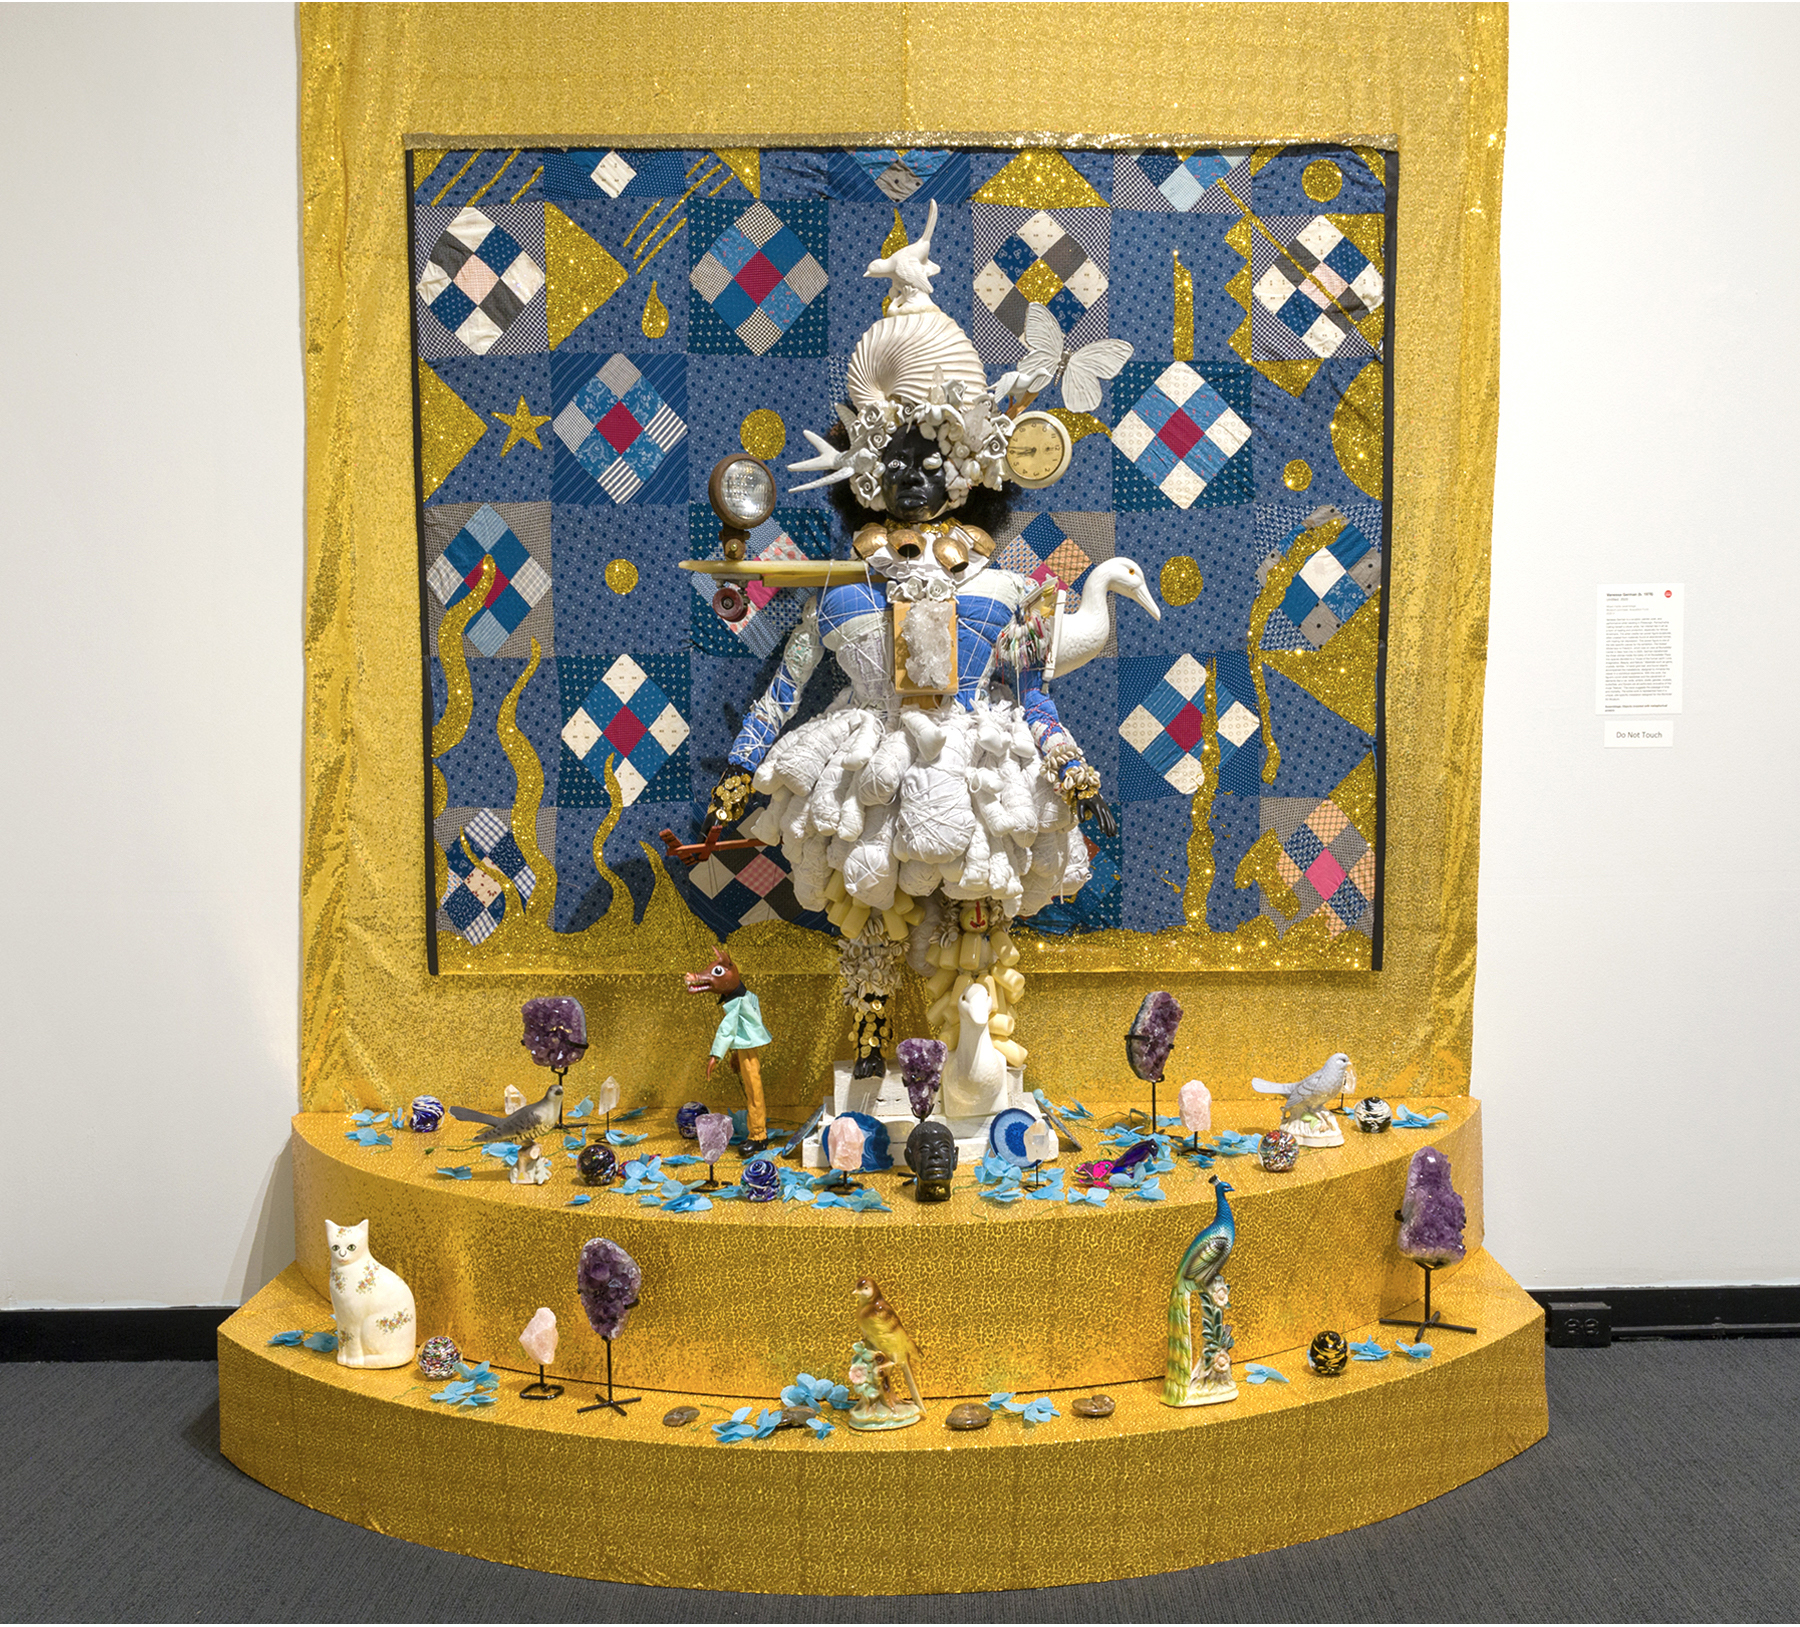 Installation view of vanessa german (b. 1976),"Untitled",2020, mixed-media assemblage,Museum purchase; Acquisition Fund, 2020.3